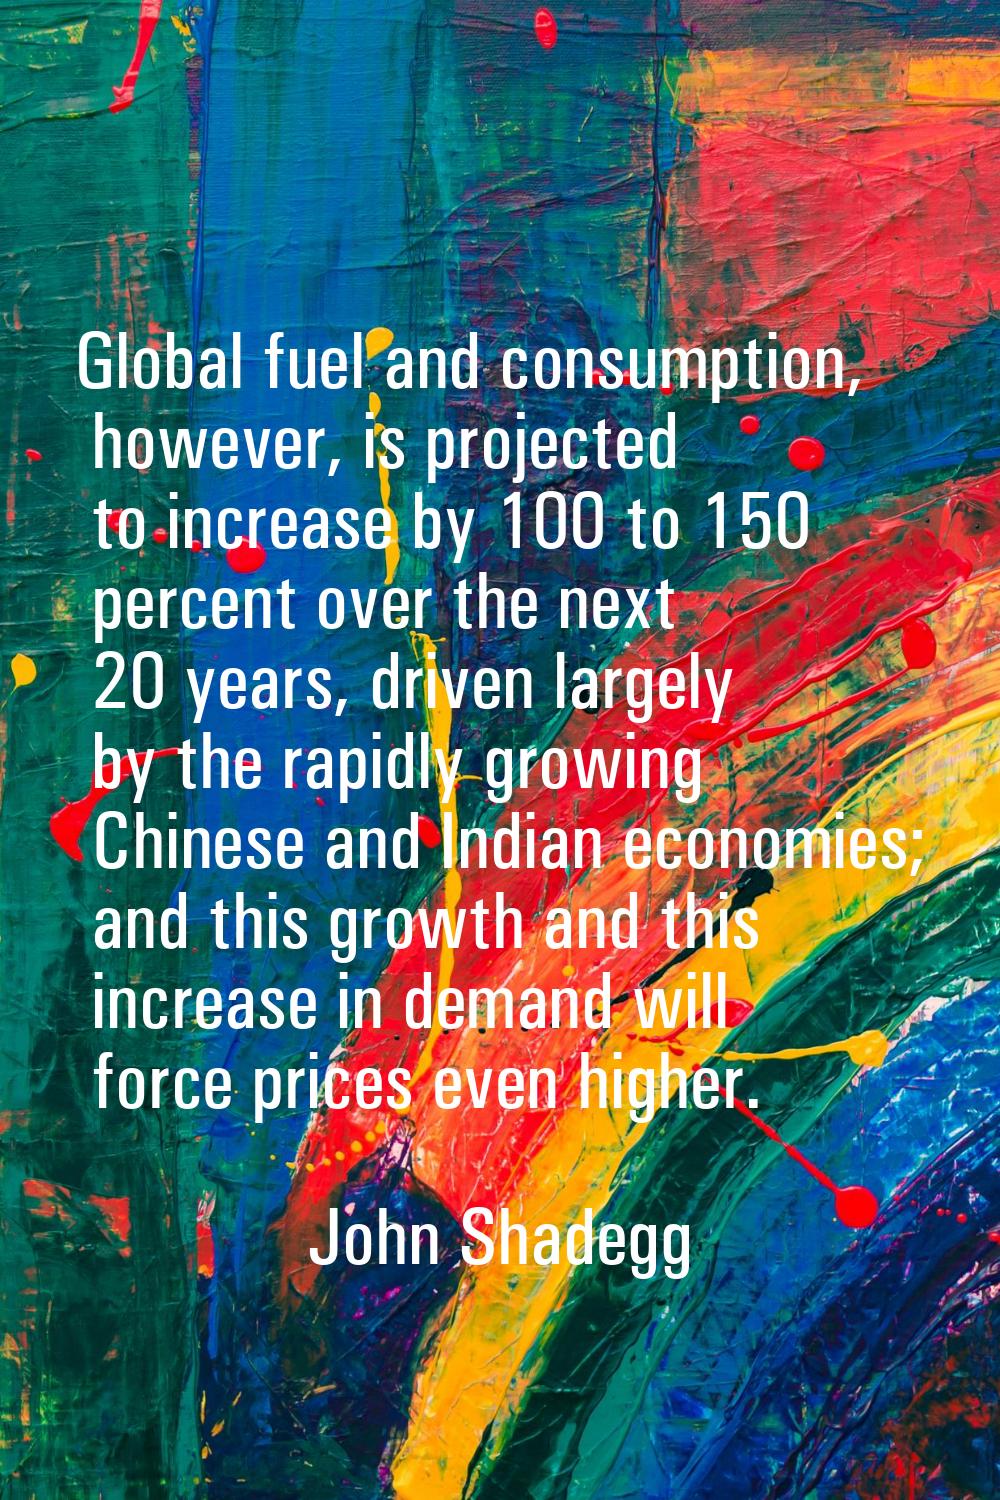 Global fuel and consumption, however, is projected to increase by 100 to 150 percent over the next 